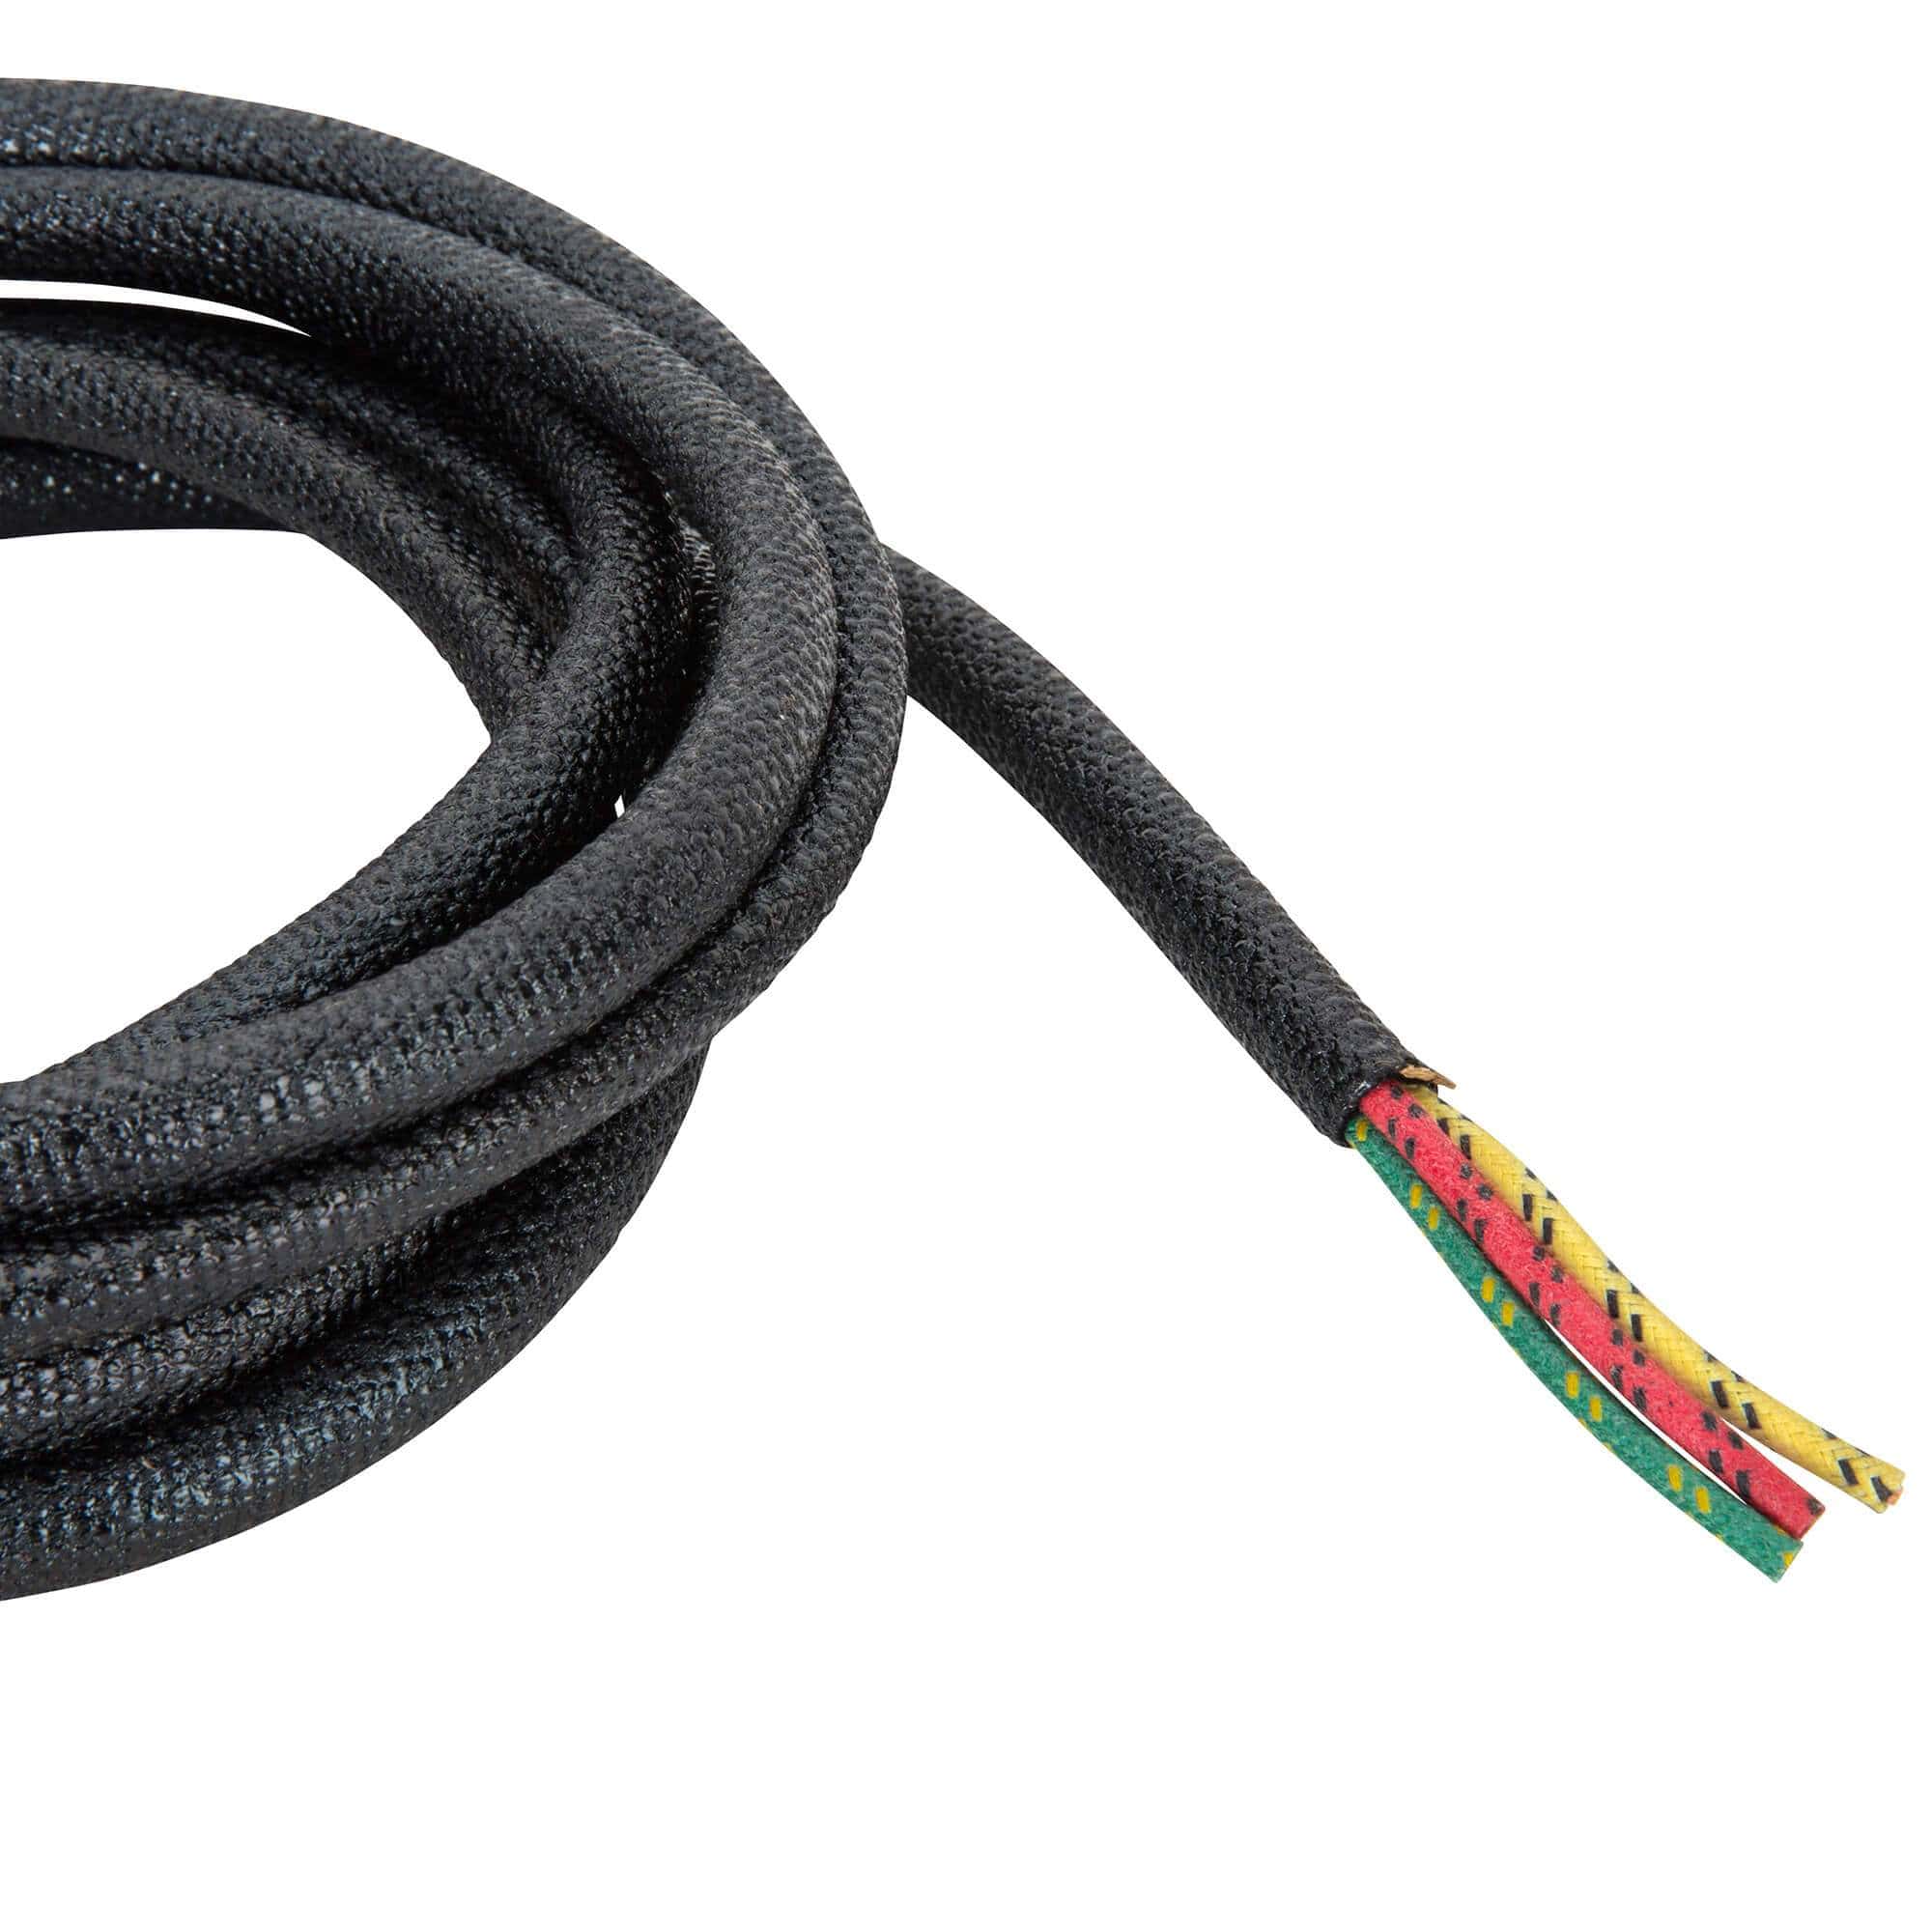  MGI SpeedWare Braided Split-Sleeve Wire Loom for  High-Temperature Automotive Harness and Home Cable Management 25 feet  (1/4) : Electronics